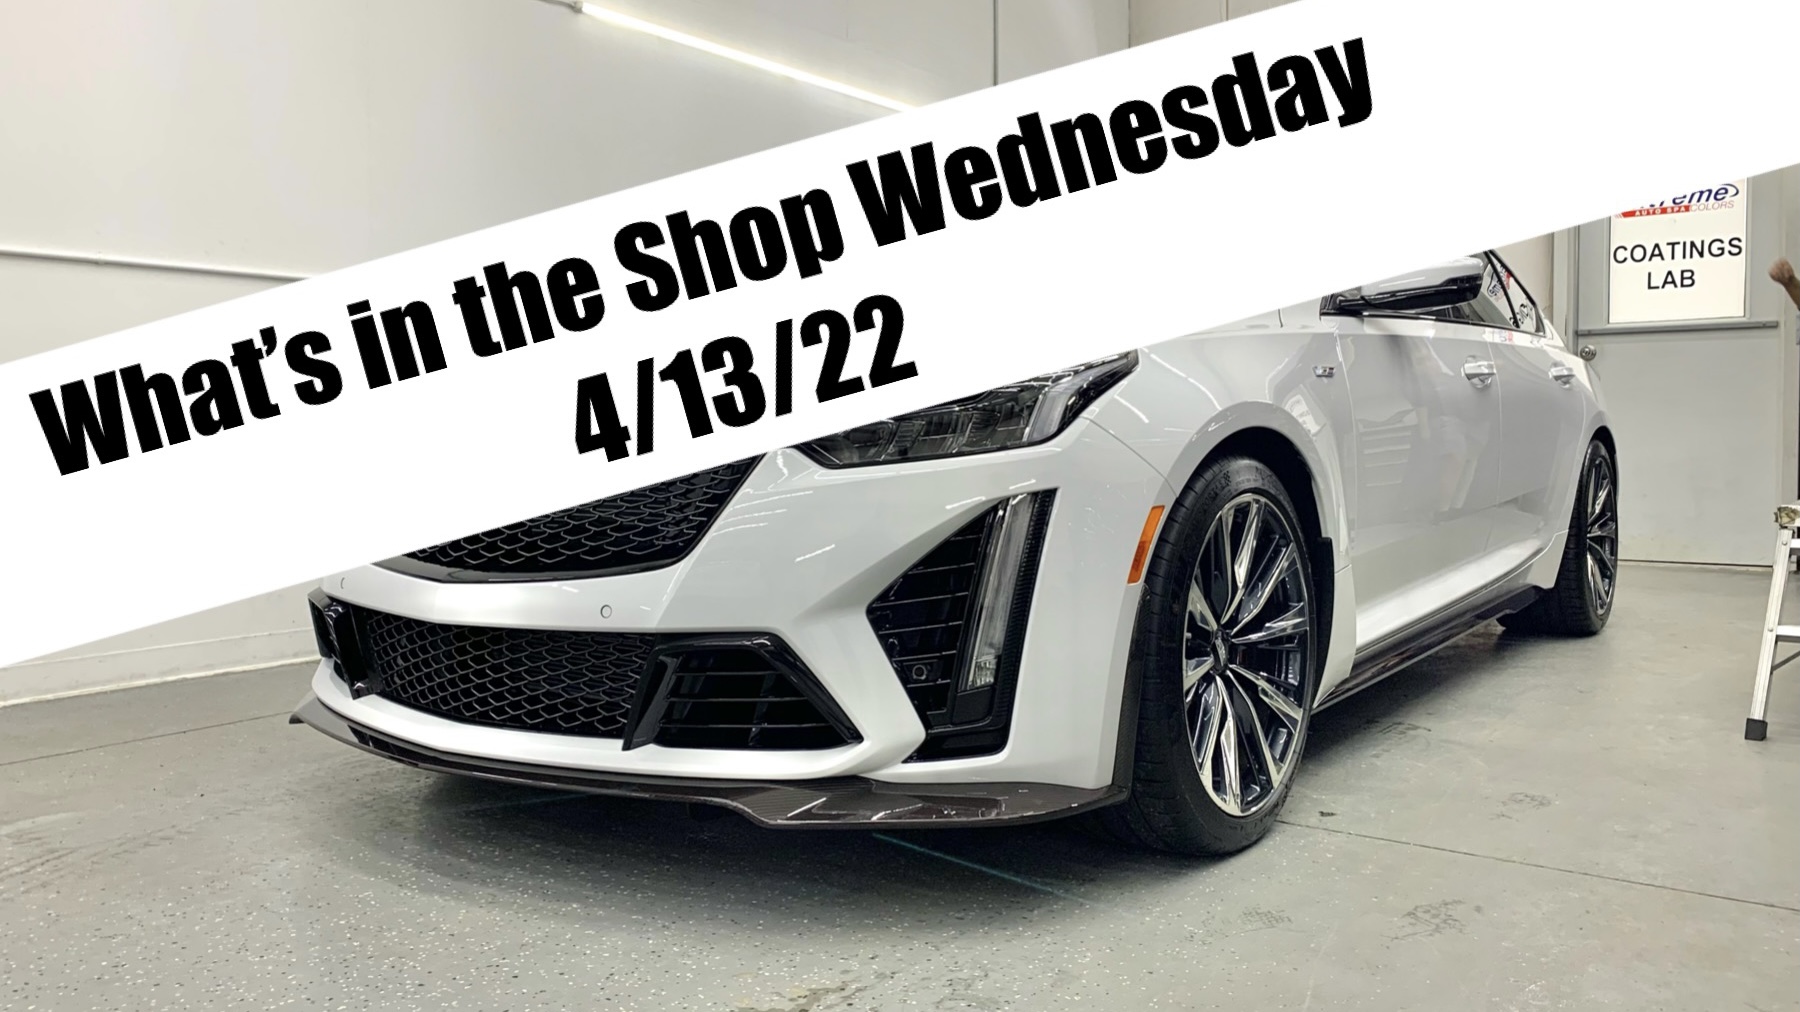 What’s in the Shop Wednesday 4/13/22